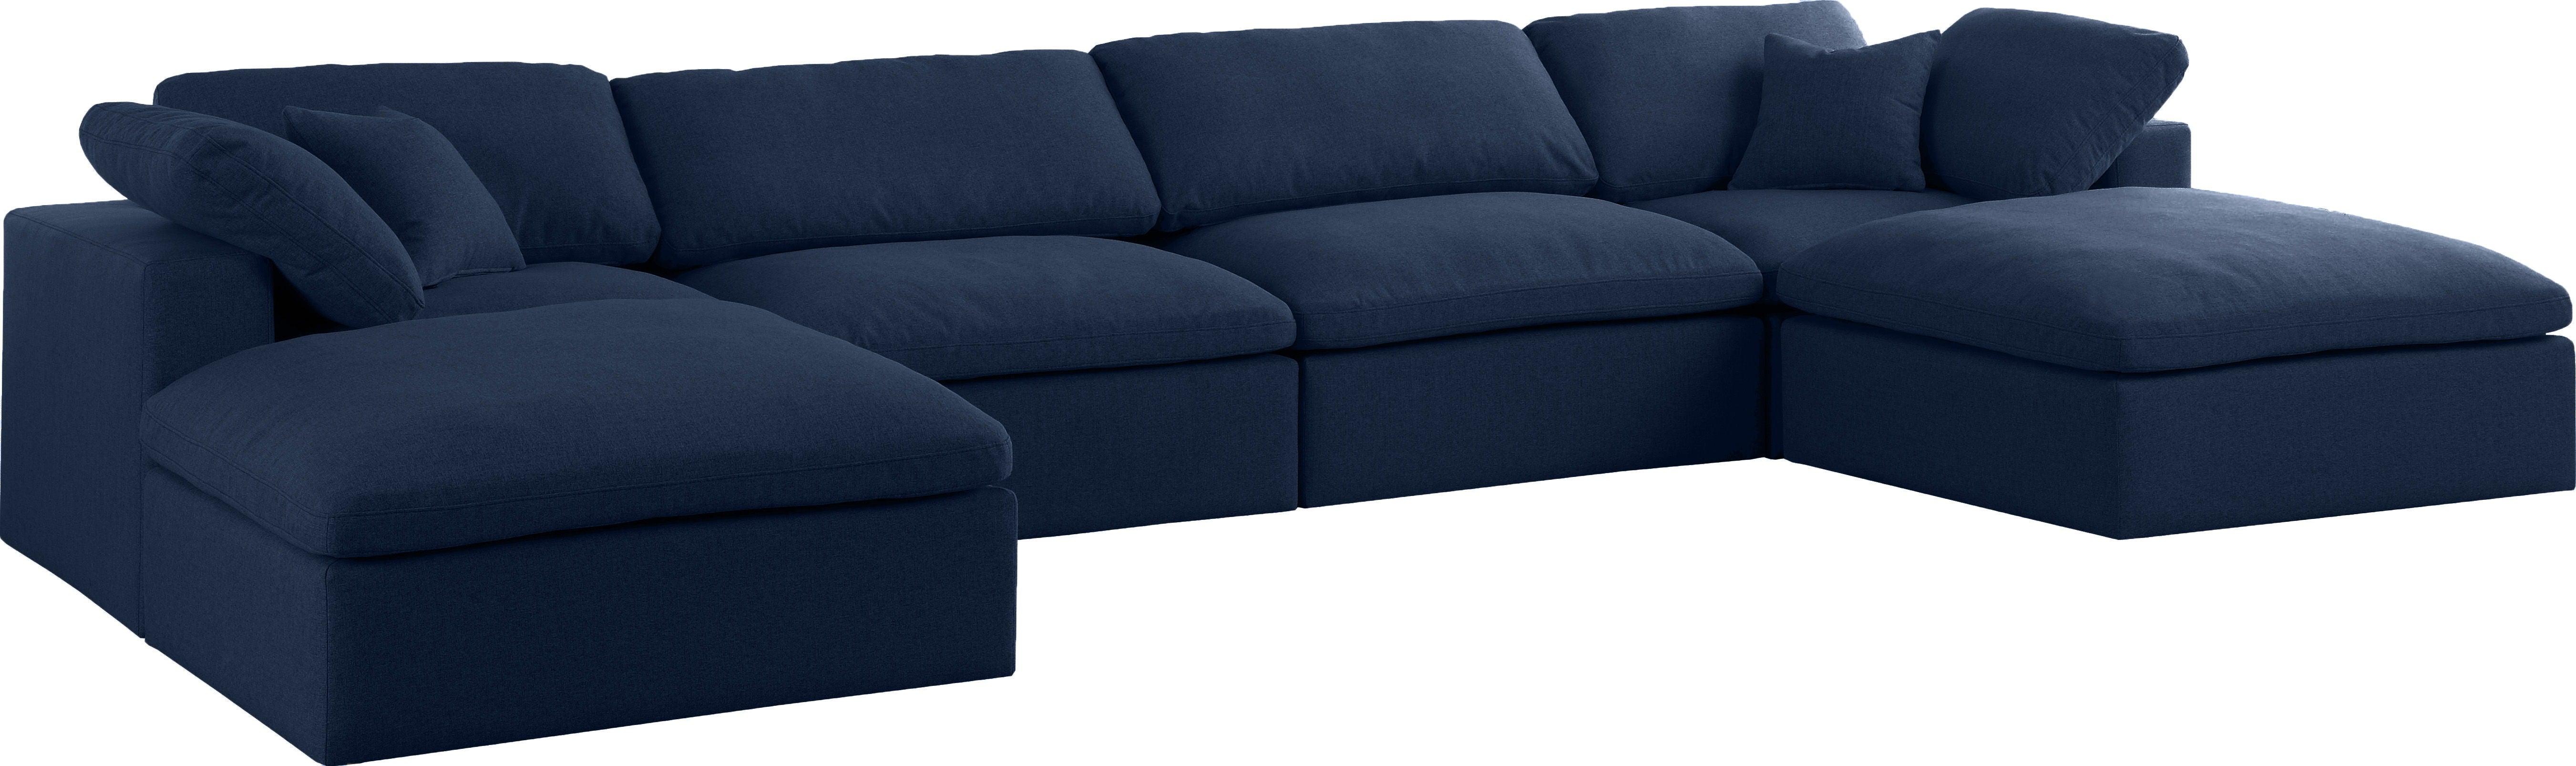 Meridian Furniture - Serene - Linen Textured Fabric Deluxe Comfort Modular Sectional 6 Piece - Navy - Modern & Contemporary - 5th Avenue Furniture